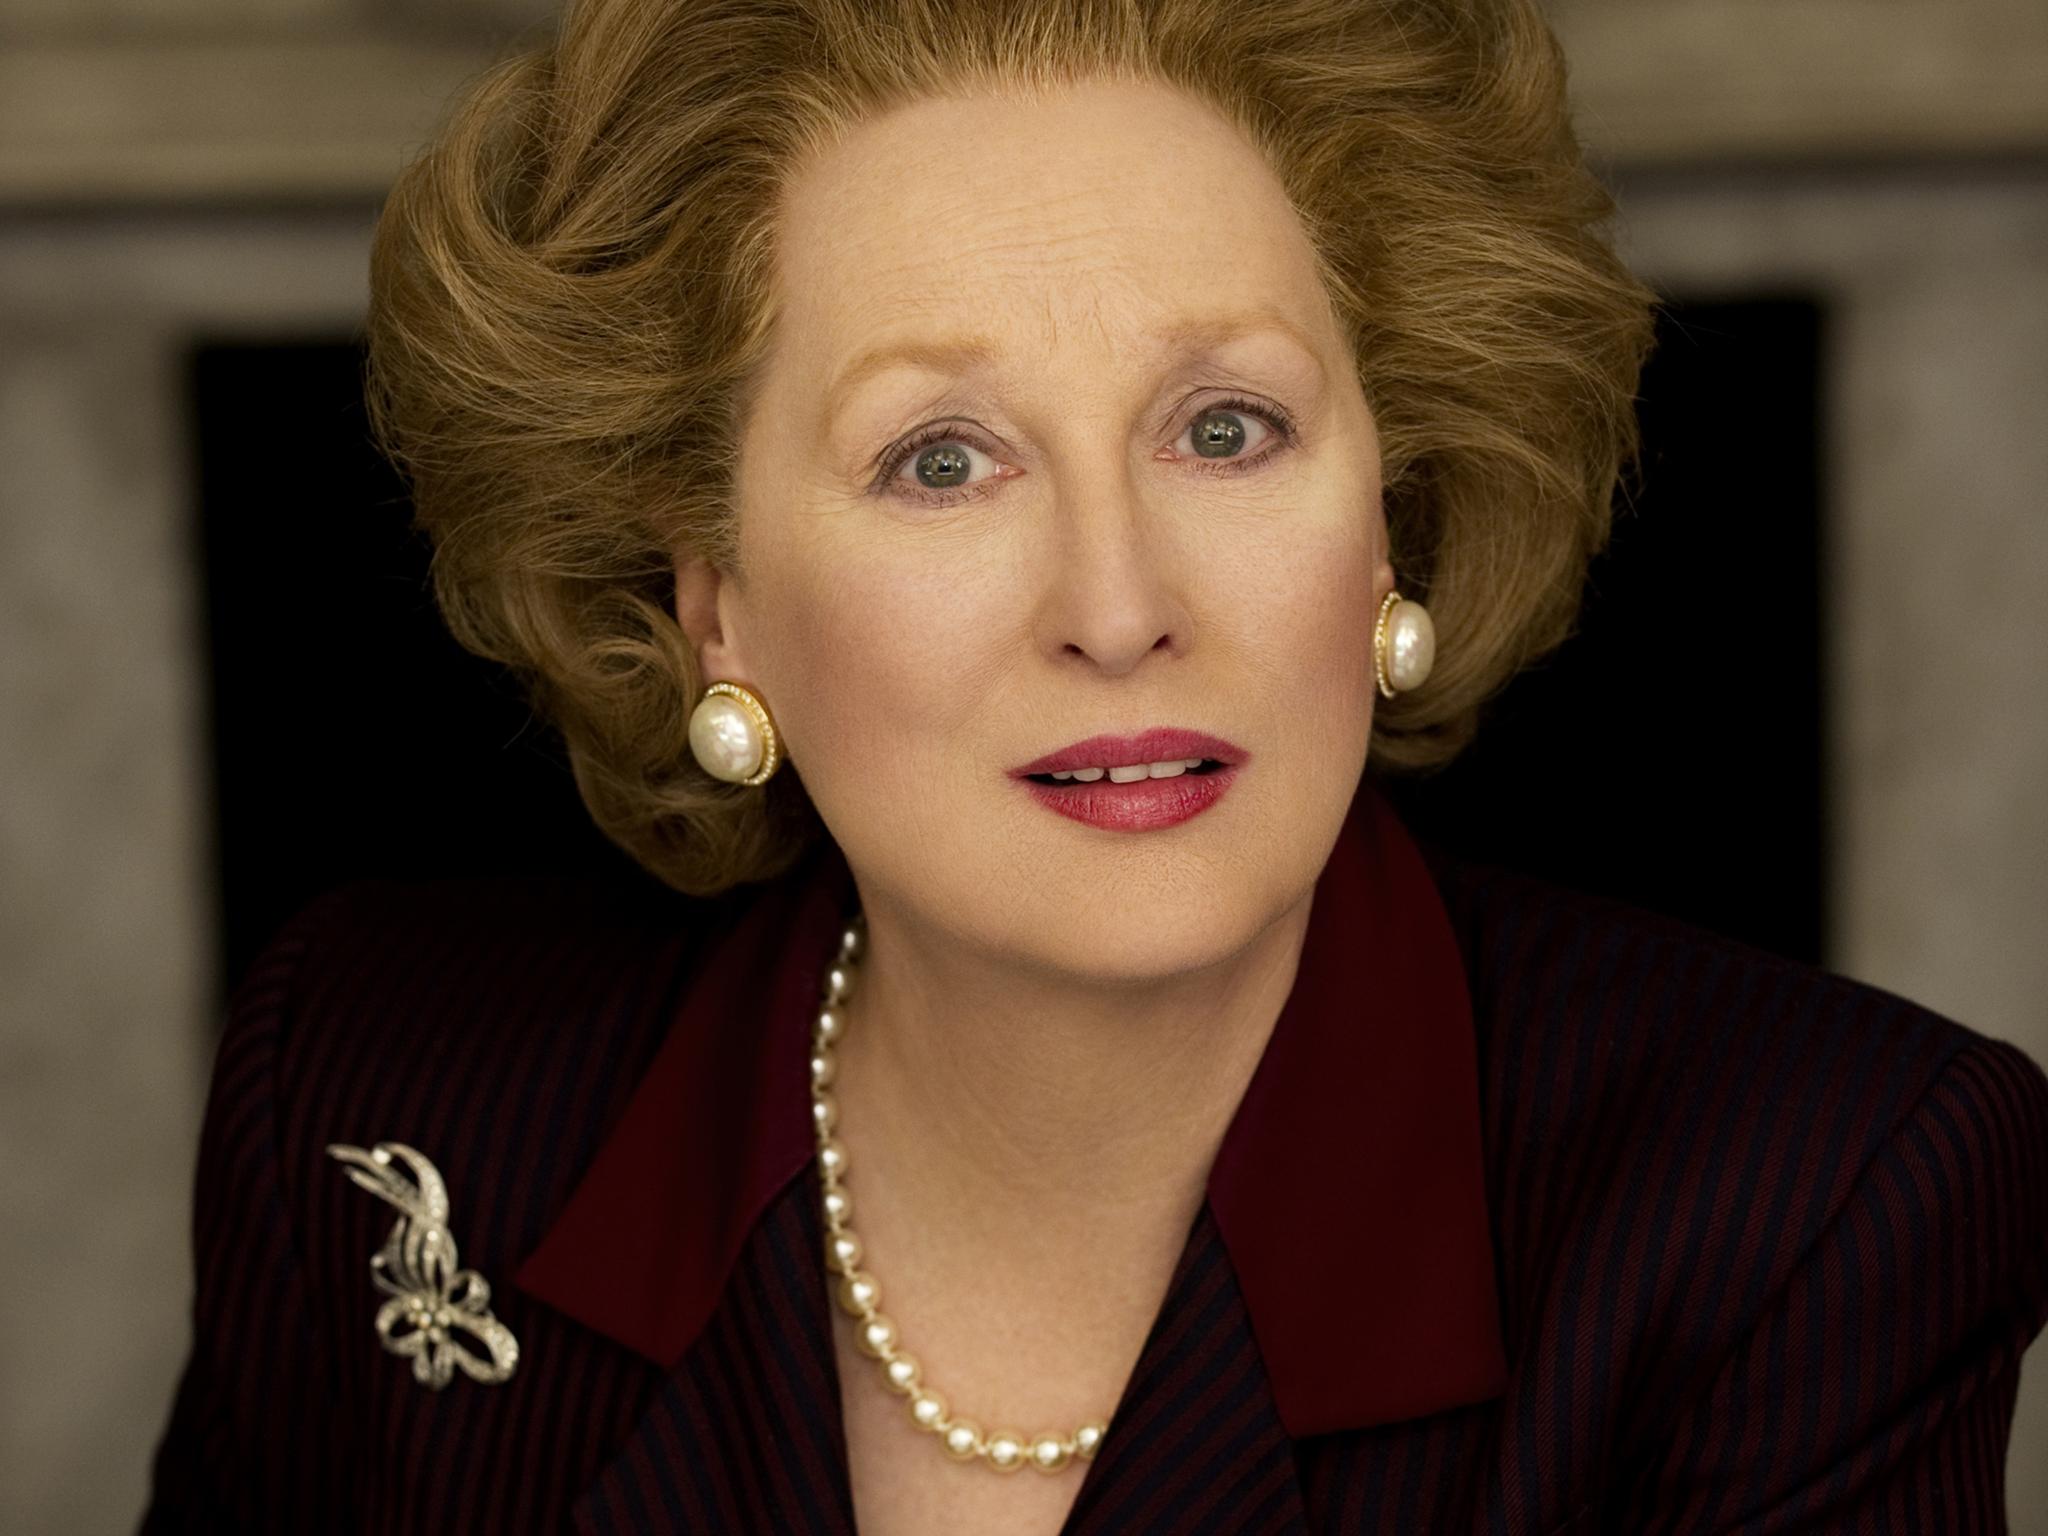 Meryl Streep who played Margaret Thatcher in 'The Iron Lady' is one of our greatest character actors